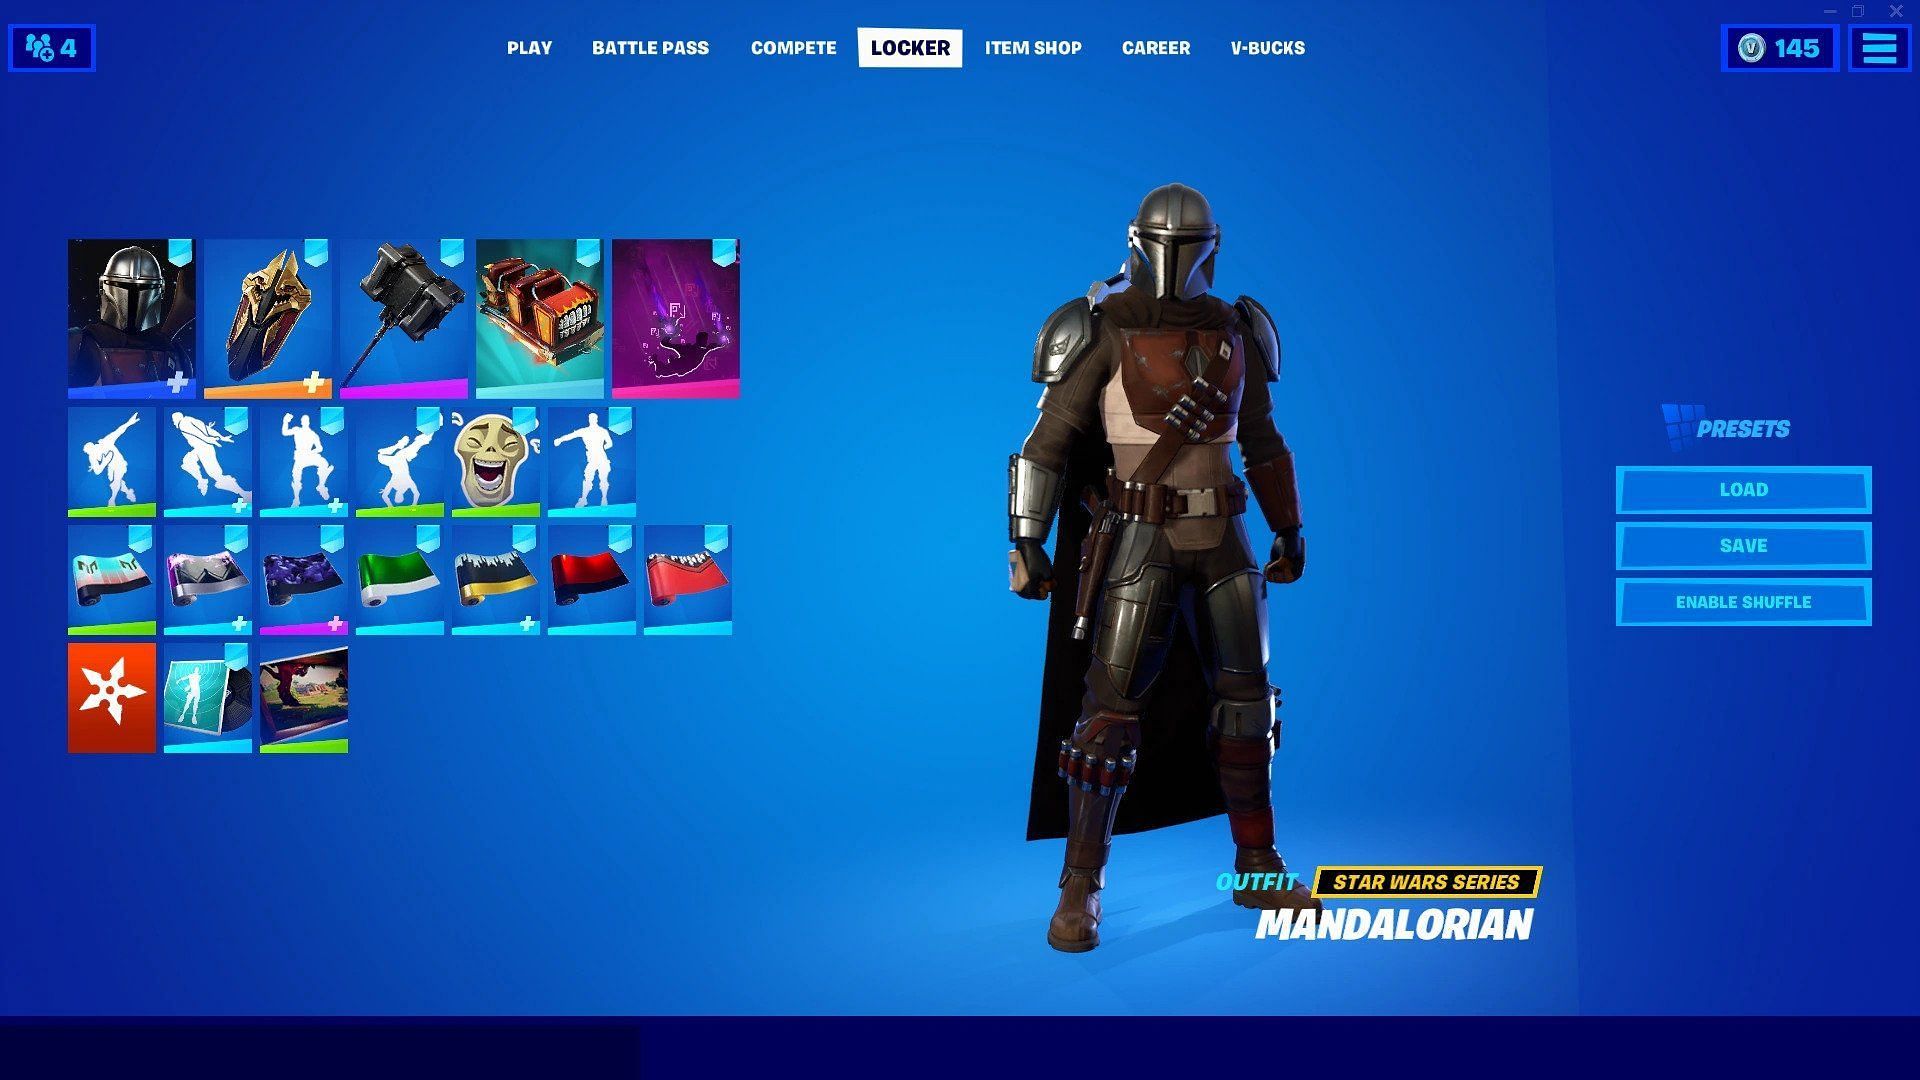 Click on the Outfit option to choose a character. (Image via Epic Games)